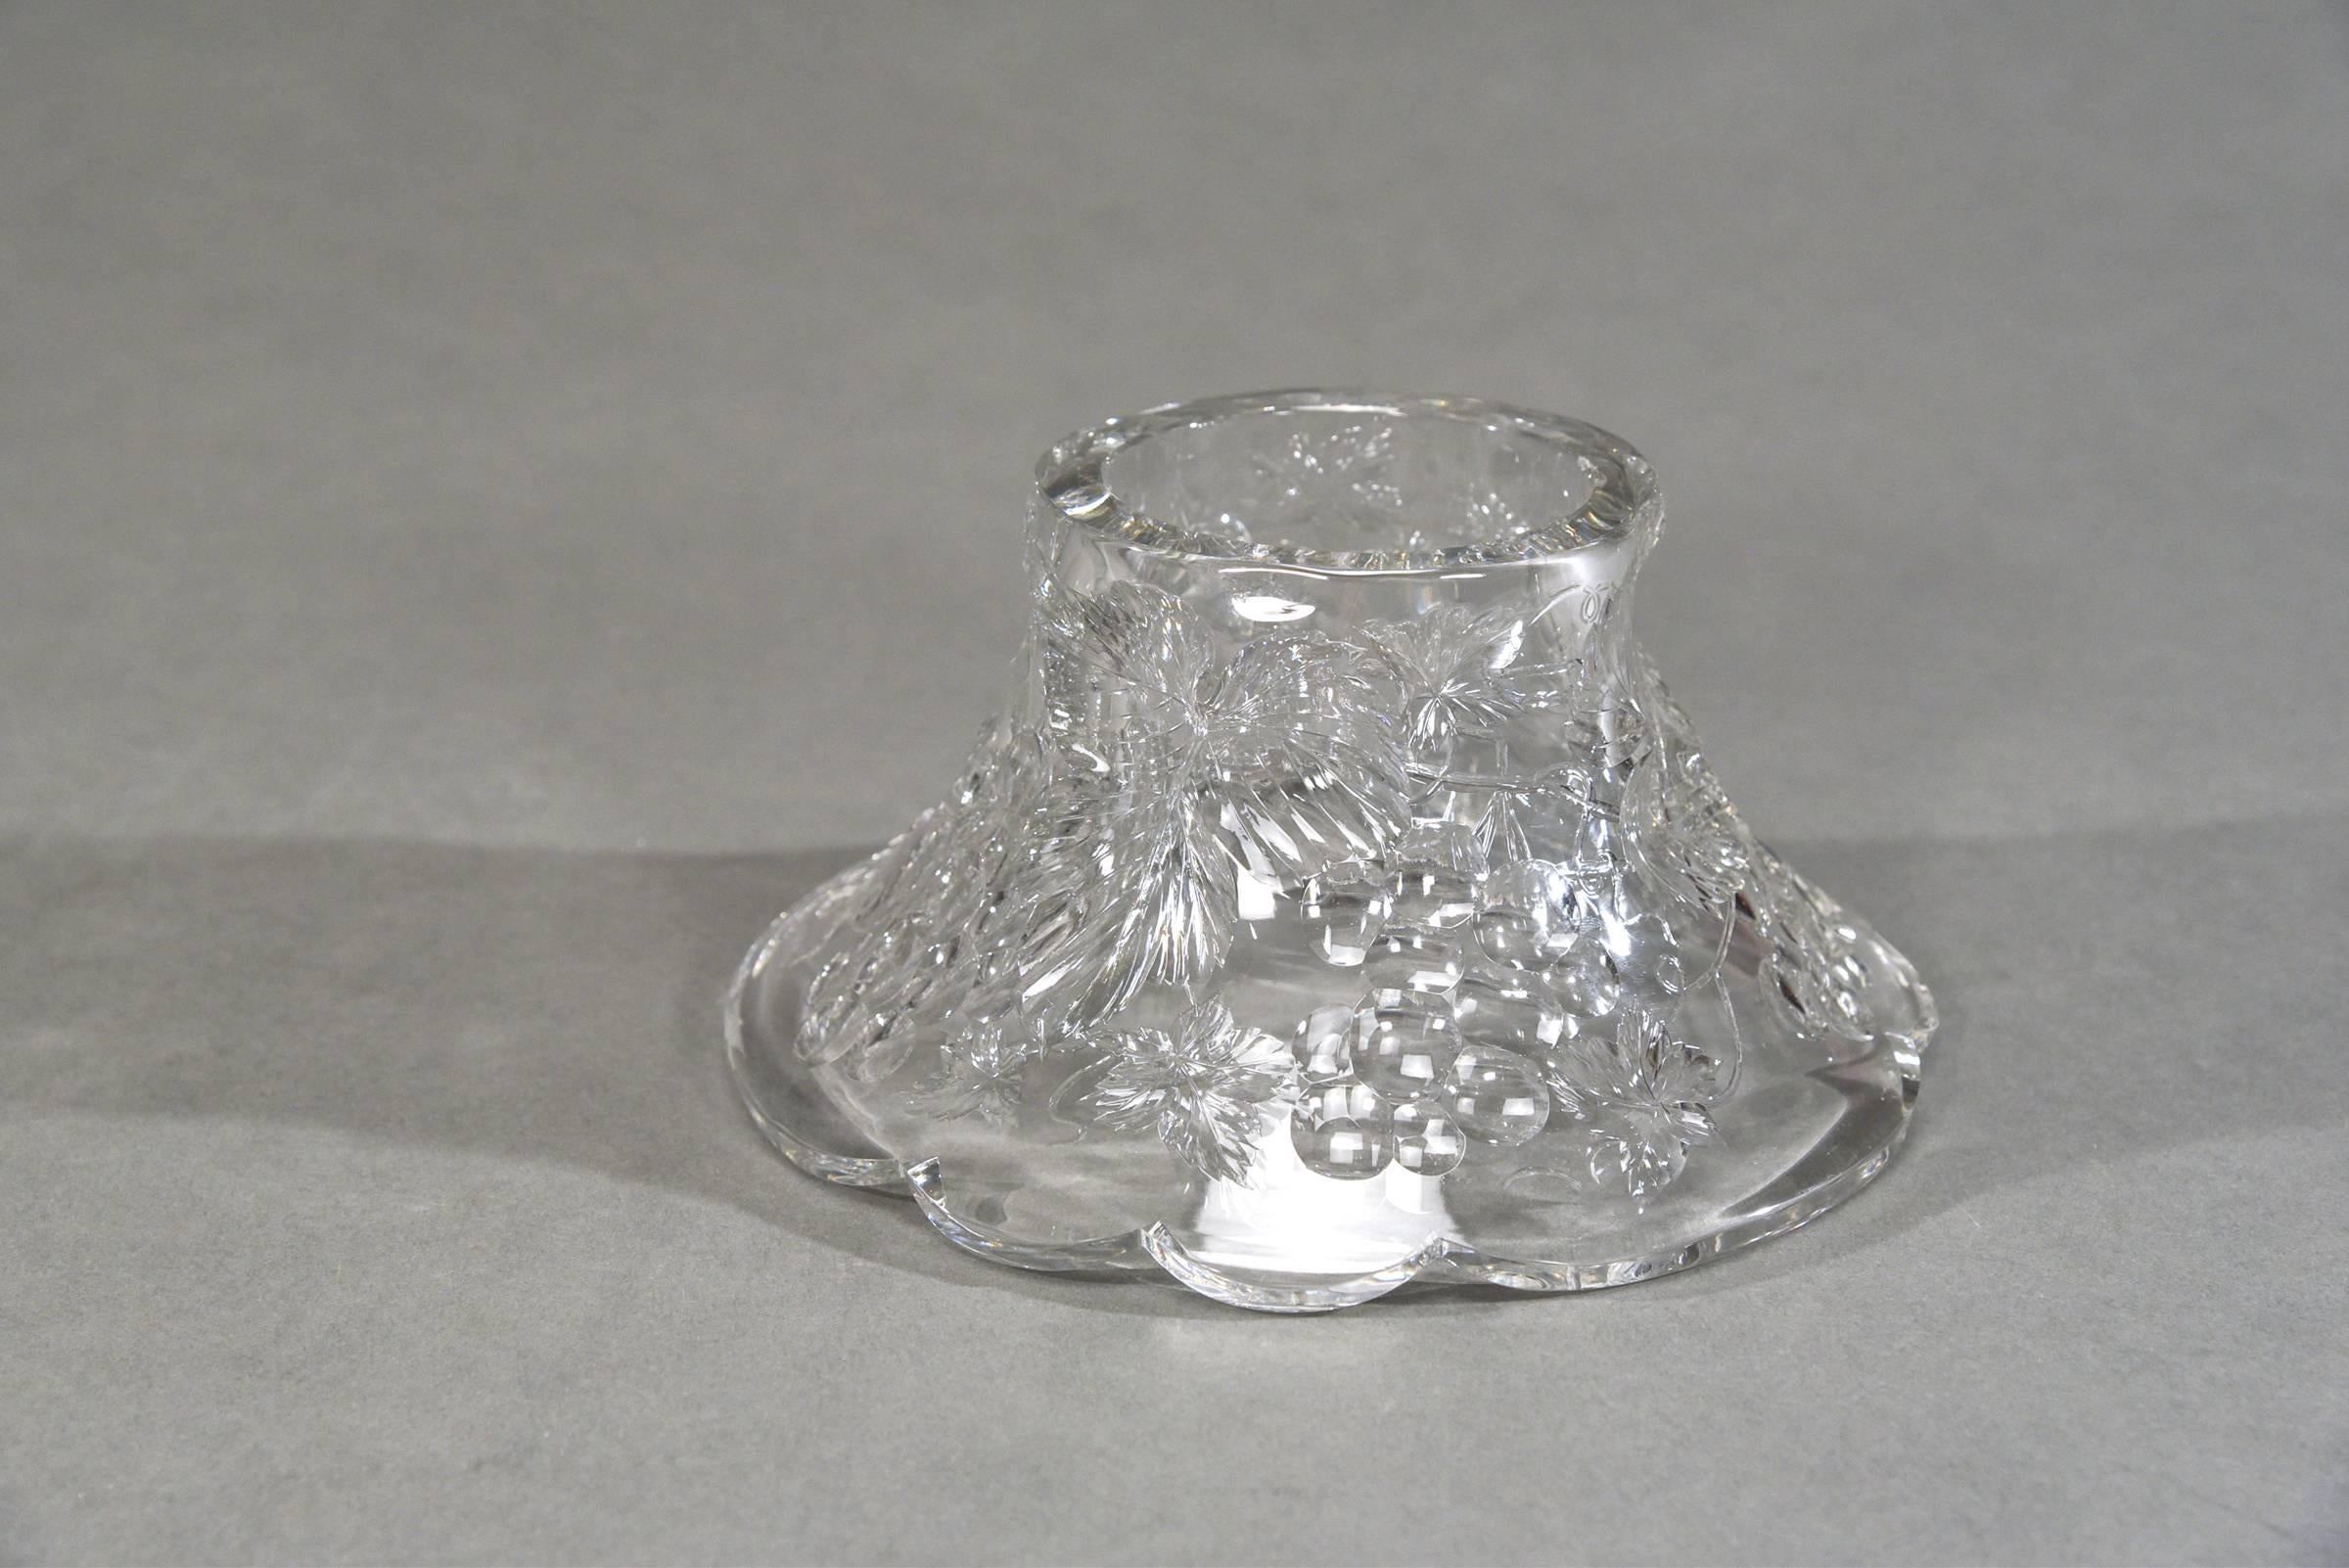 What a spectacular example of the finest intaglio cutting! The incredible hand blown crystal blank is 1/2